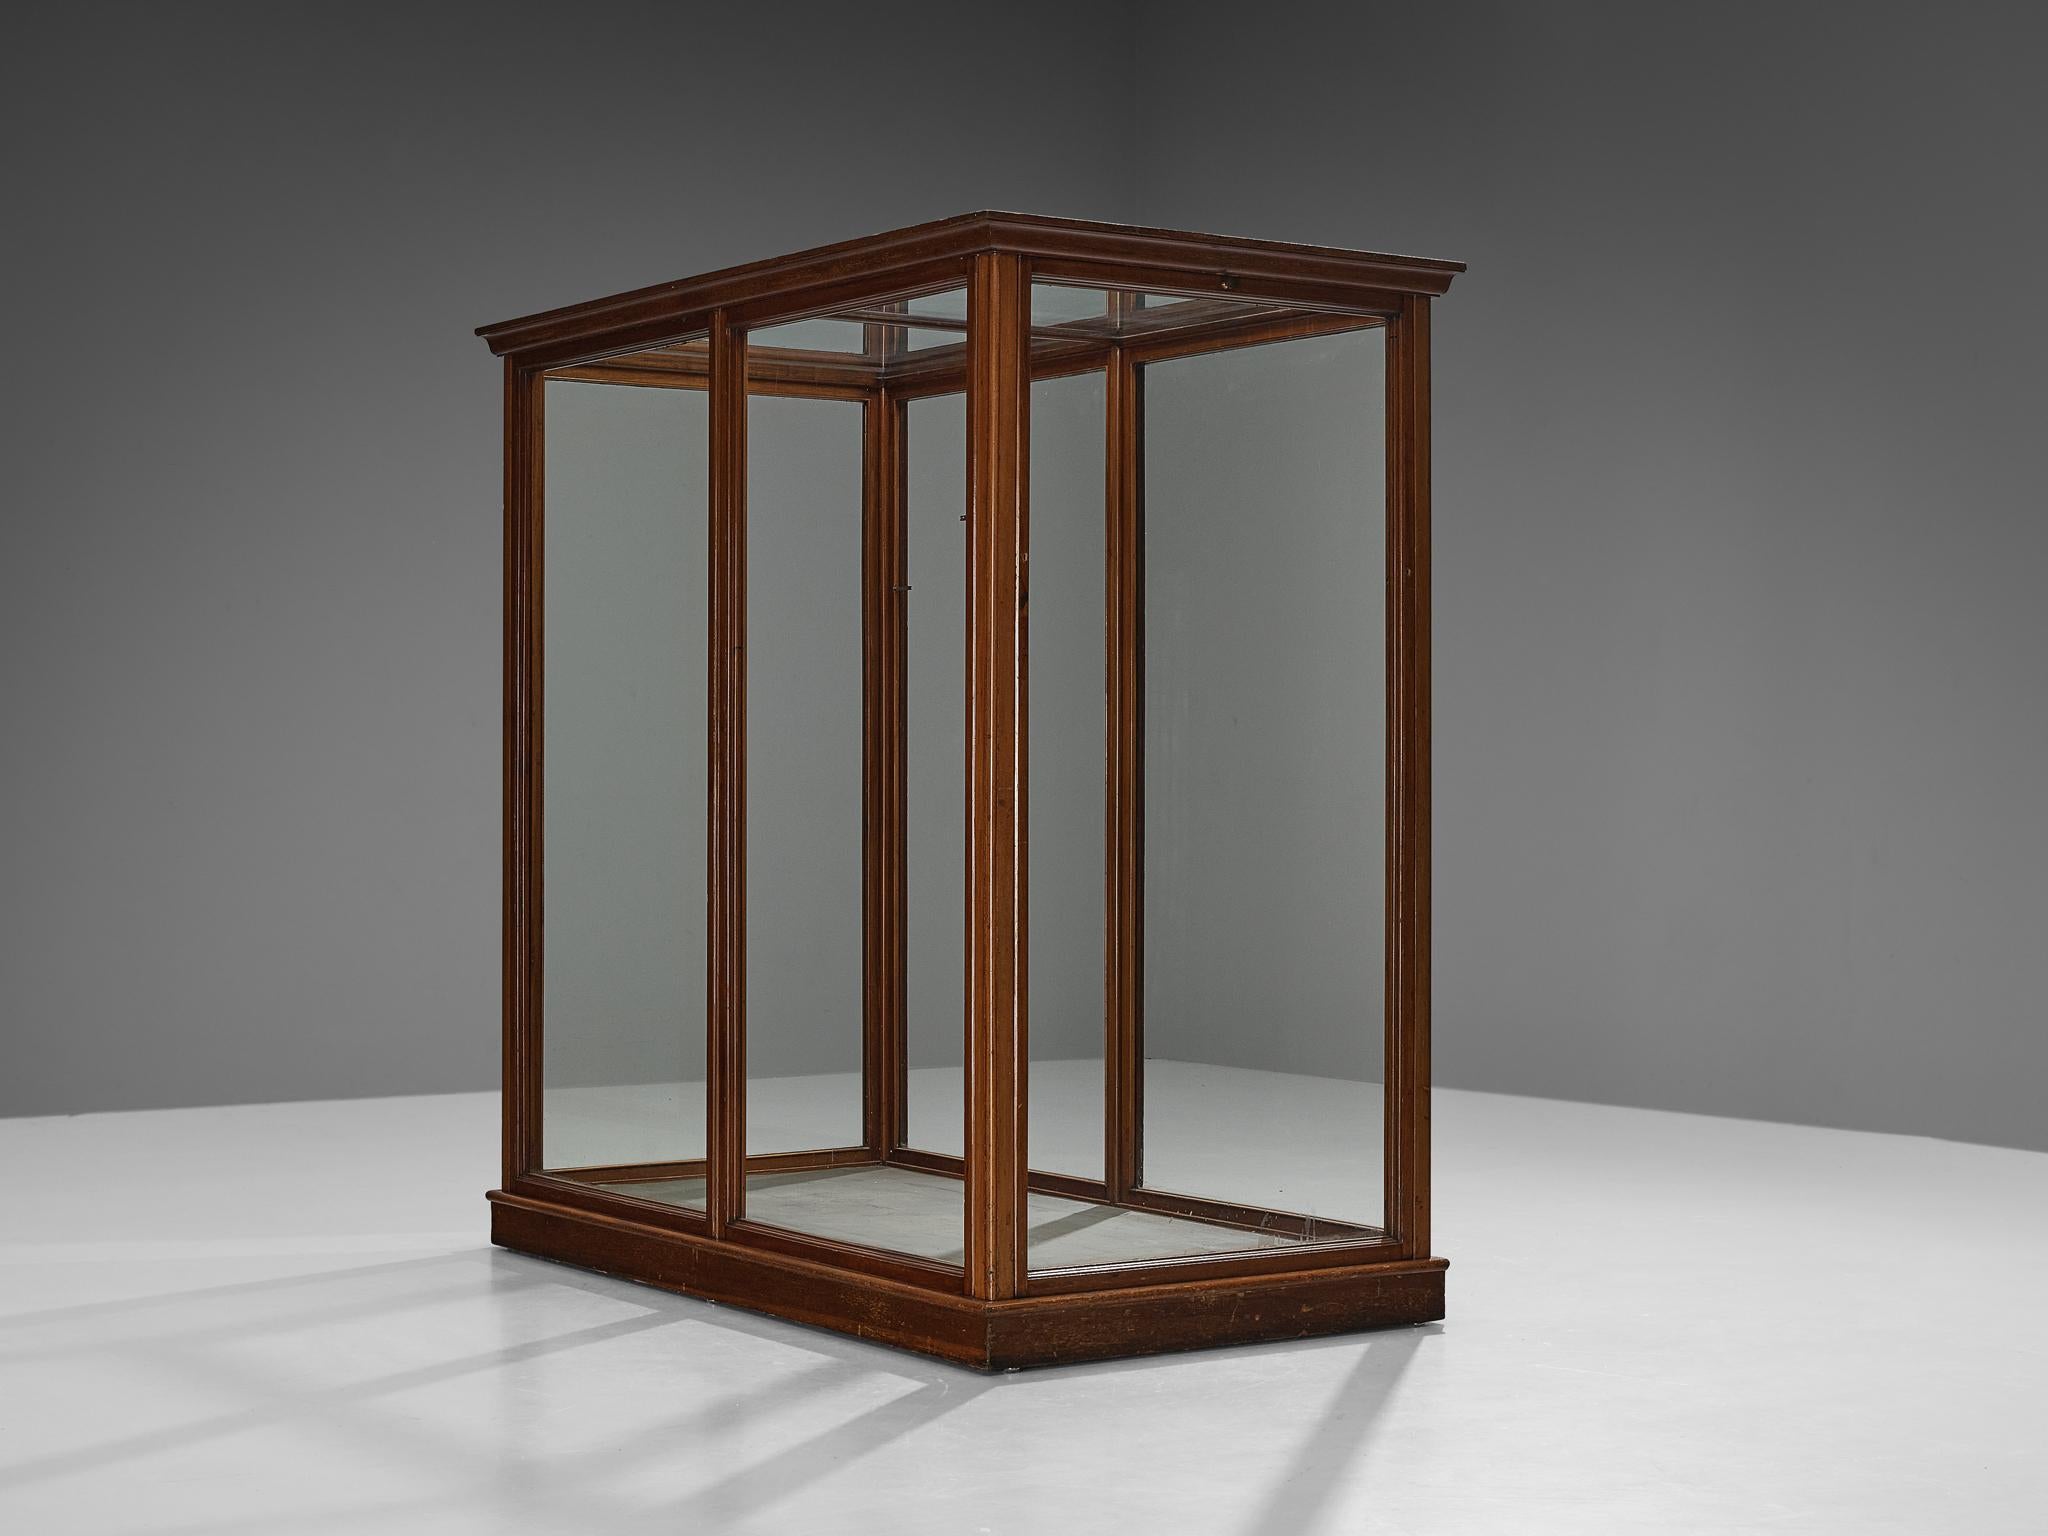 Showcase or vitrine, stained mahogany, original glass, Denmark, 1930s

A large rectangular-shaped showcase that is ideal for exhibiting your valued items. The vitrine offers a lot of presentation space, with a length of 287.5 cm (113.19 in.). This